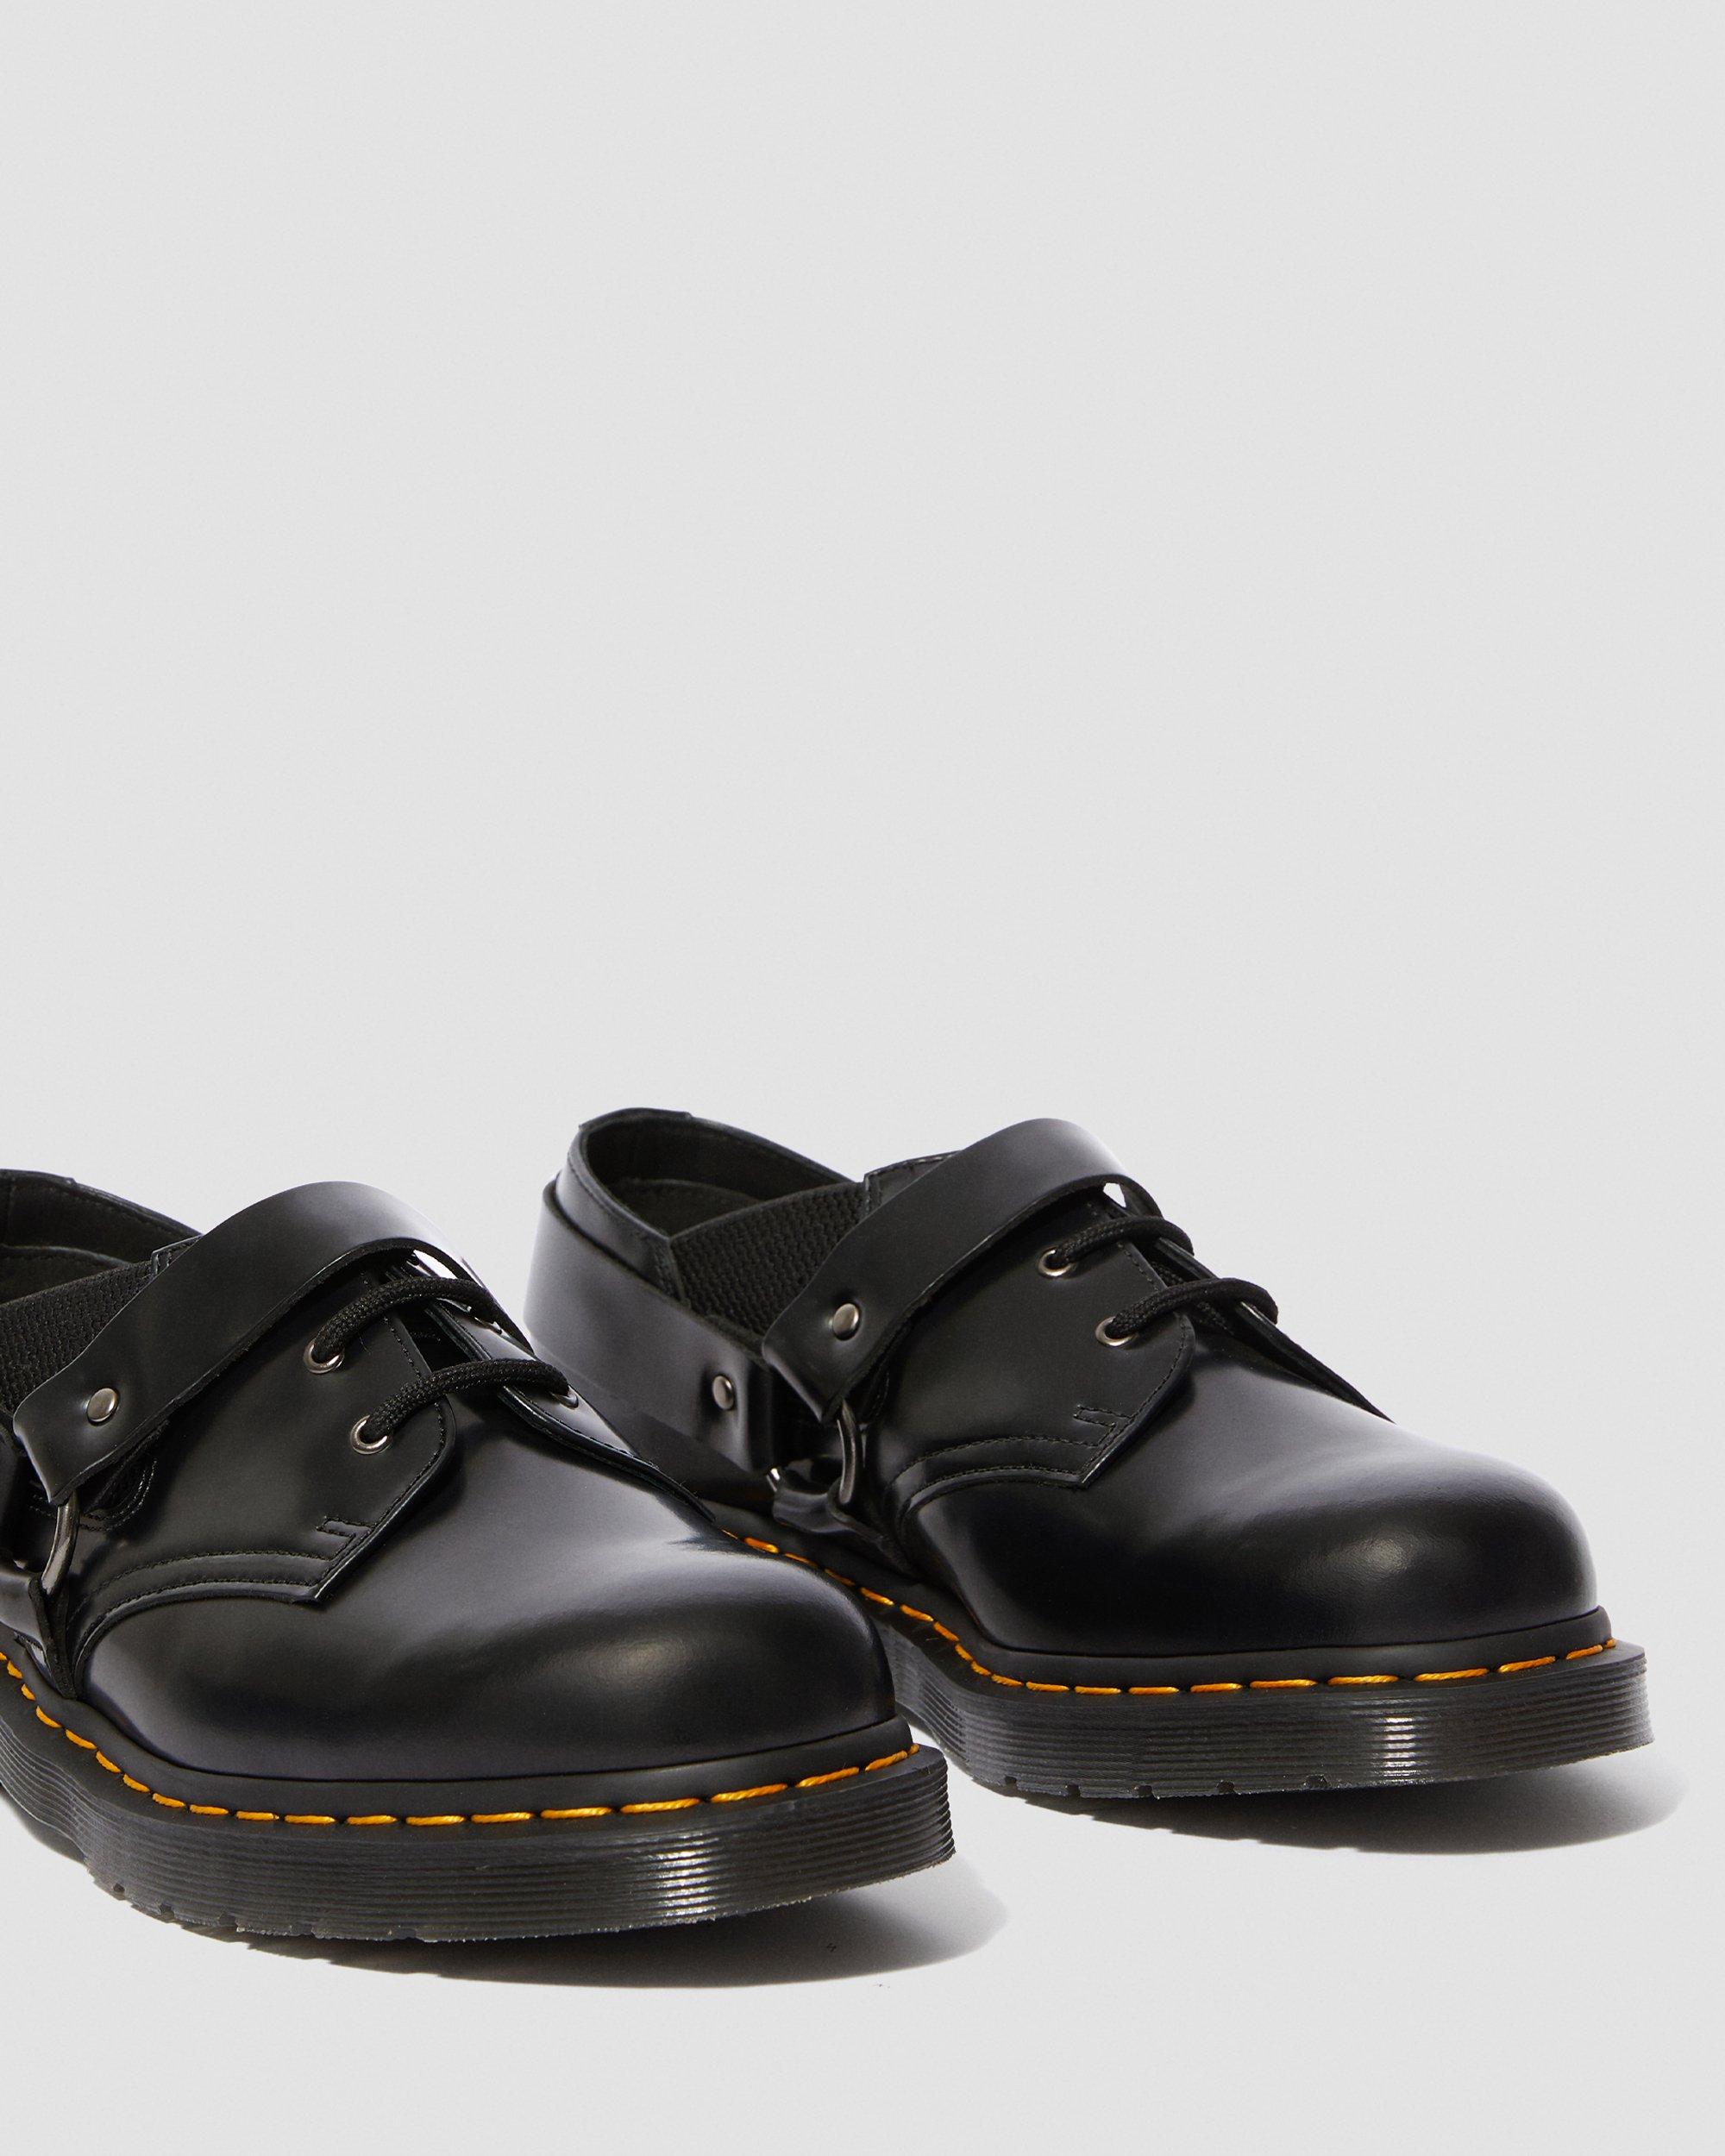 FULMAR SMOOTH LEATHER BUCKLE SHOES | Dr 